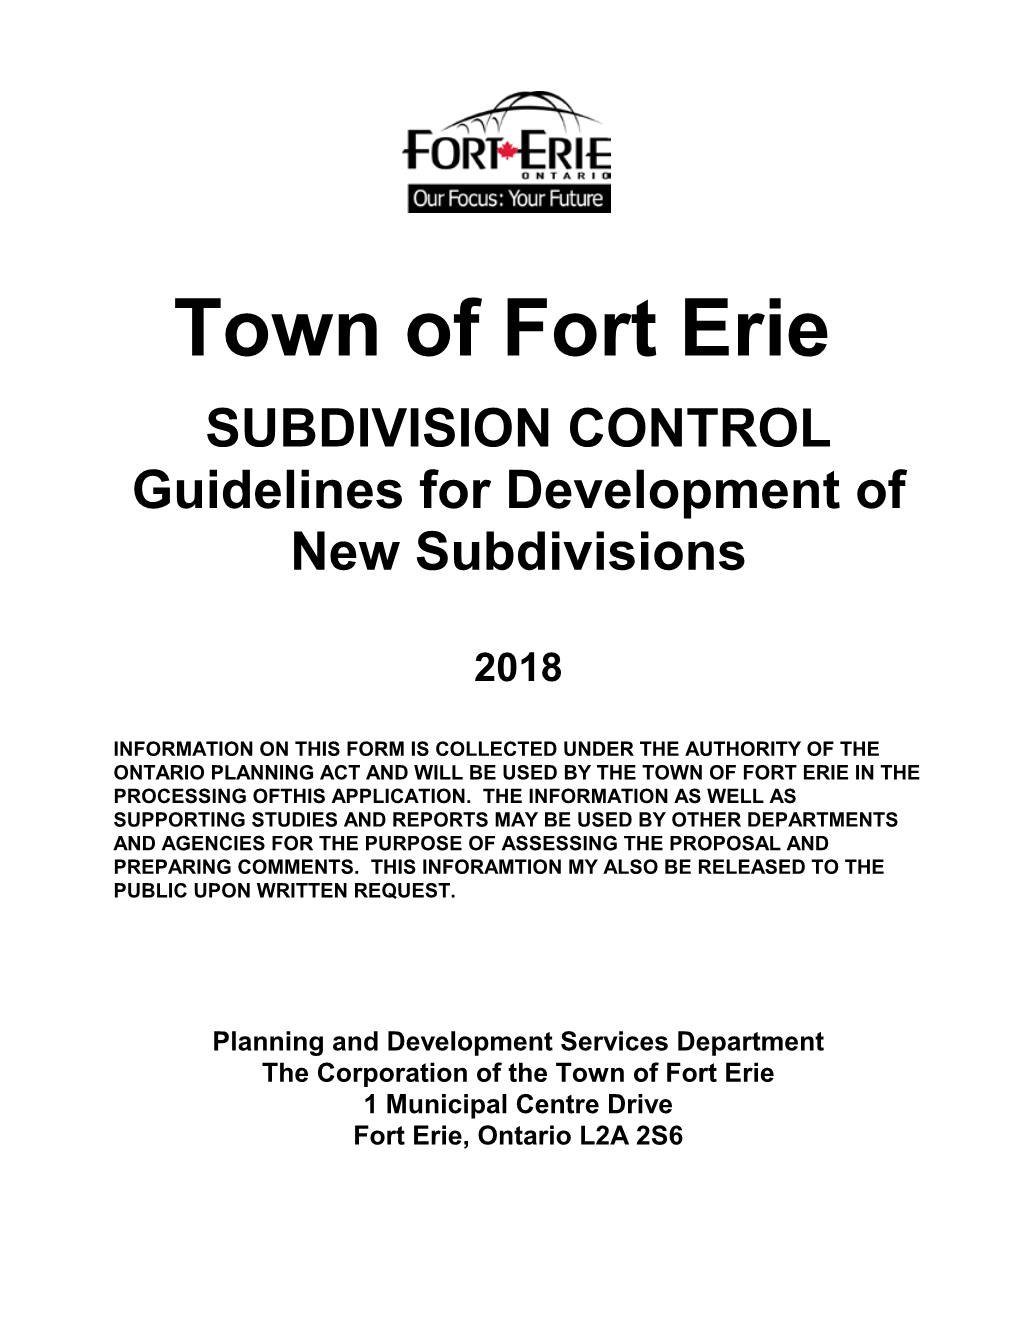 SUBDIVISION CONTROL Guidelines for Development of New Subdivisions